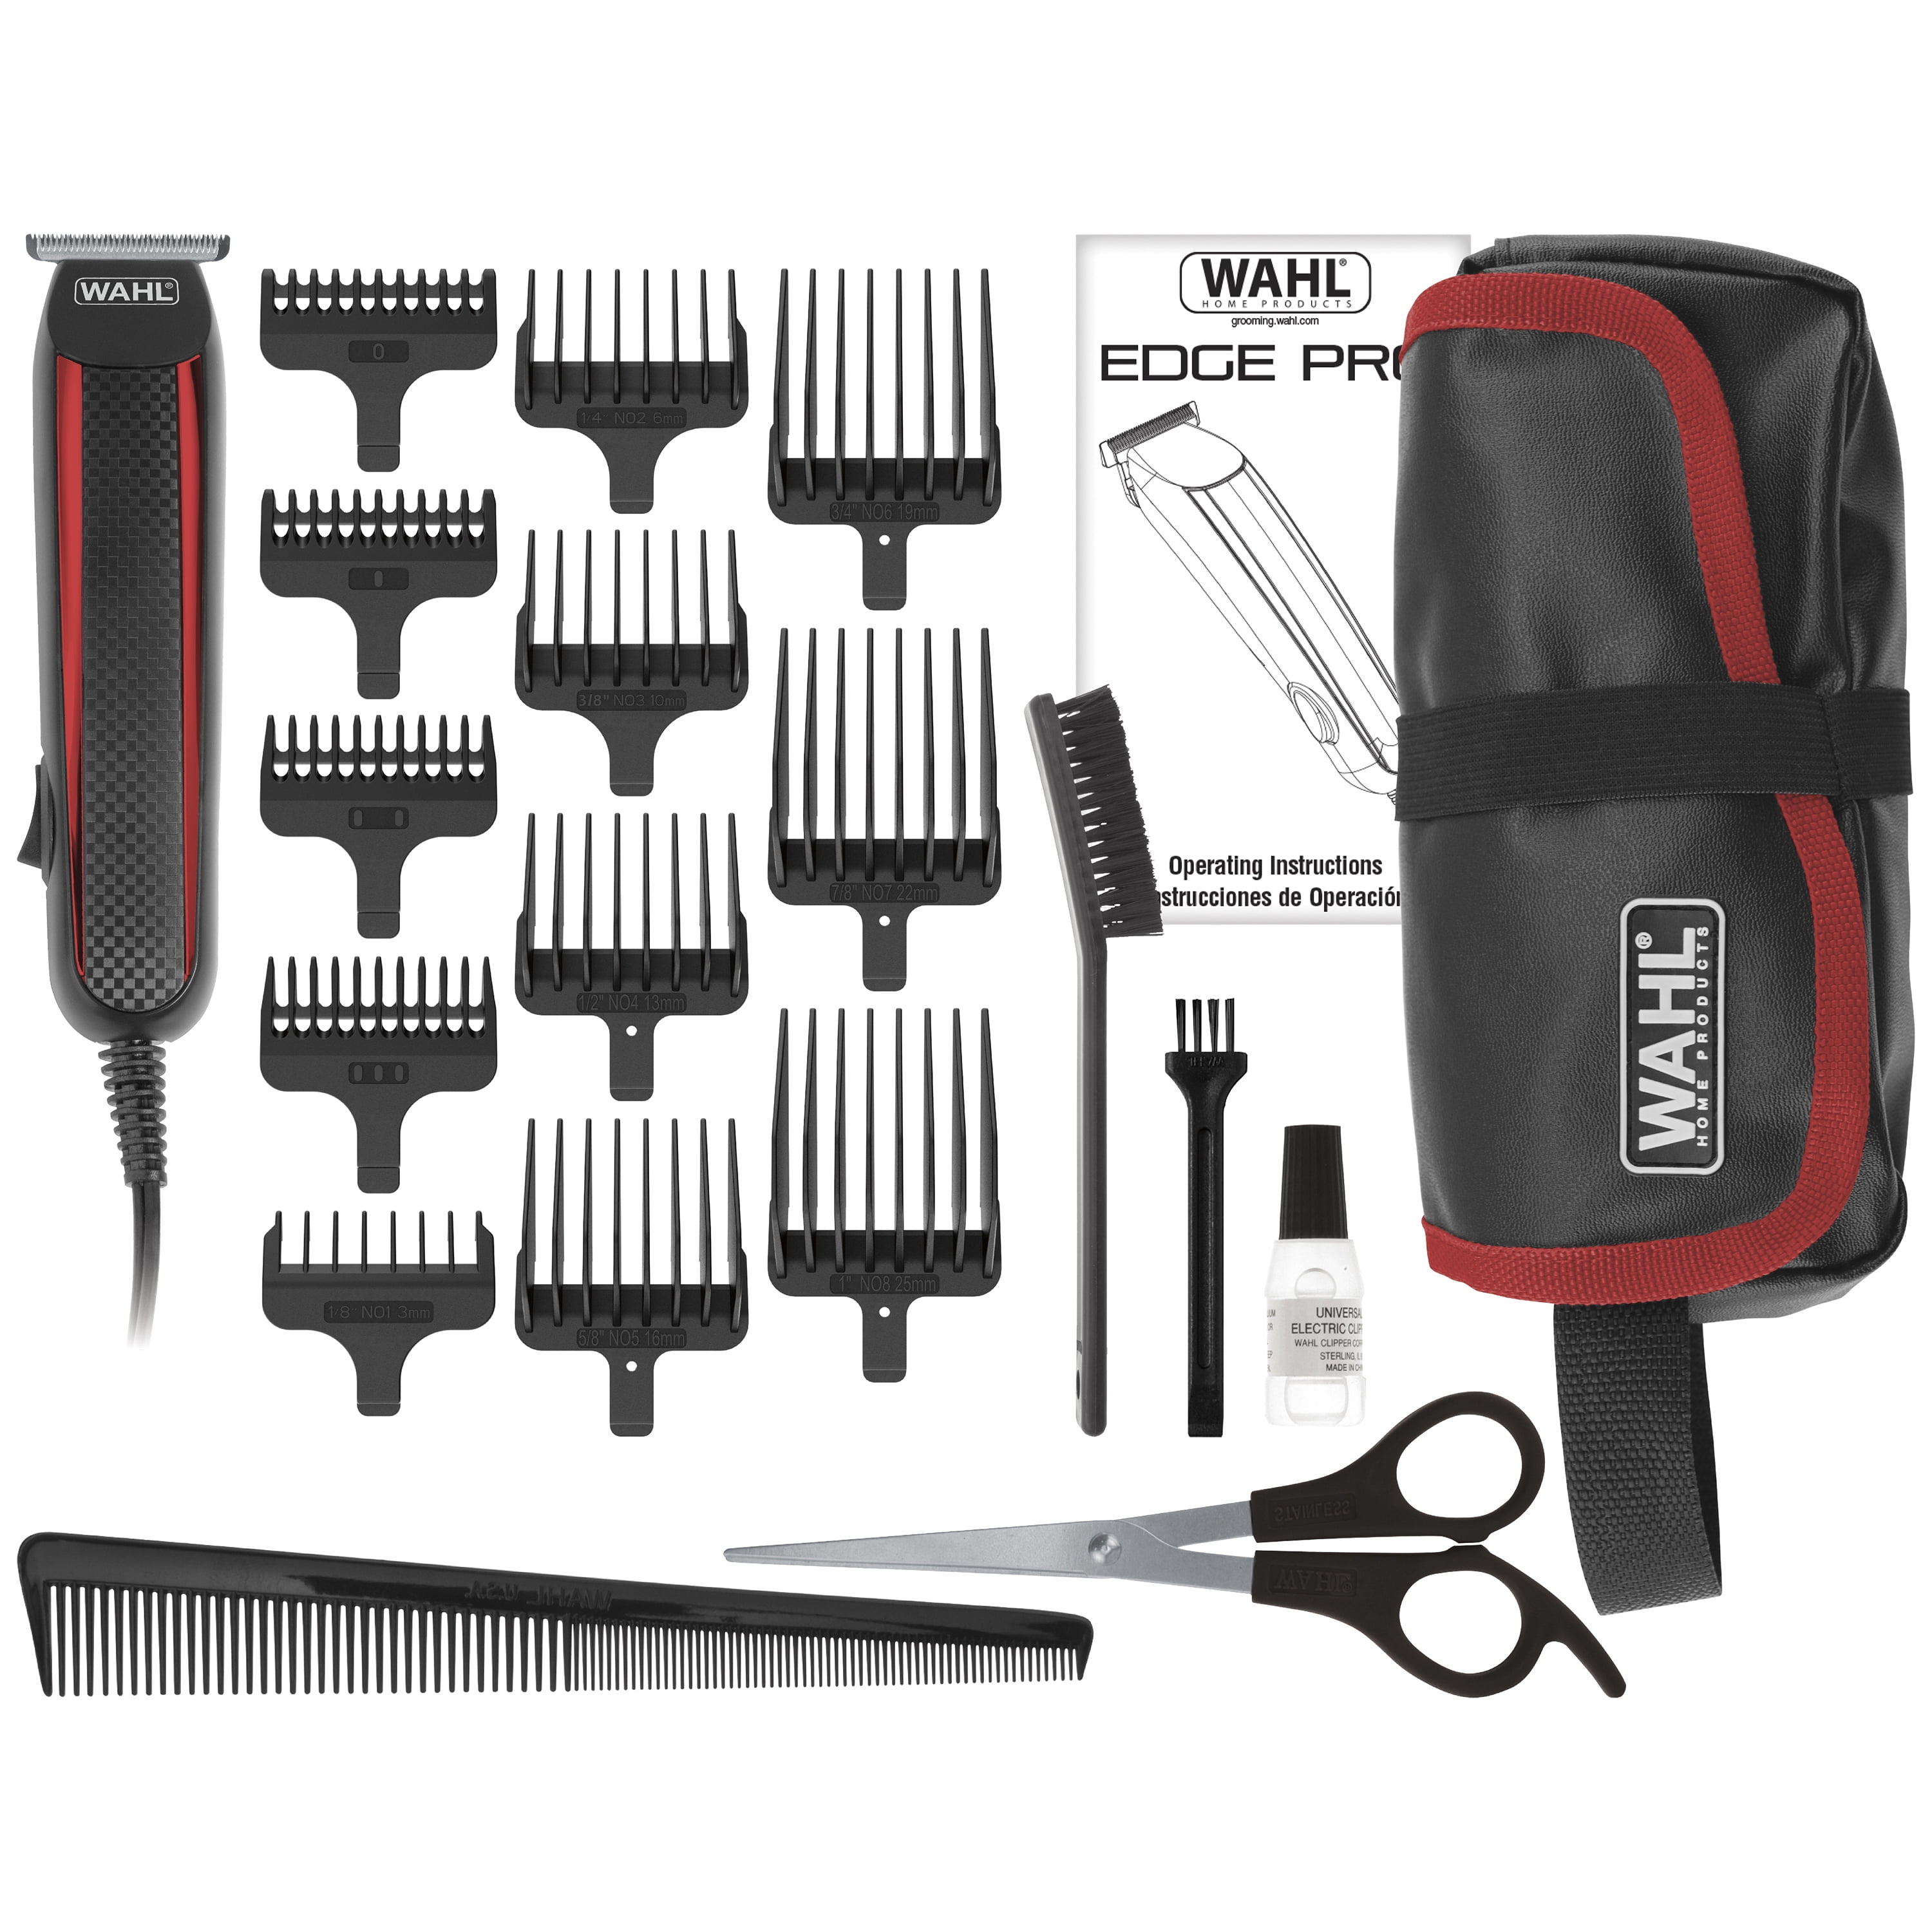 Wahl Edge Pro Travel Size Professional Men's Hair Cutting Kit, 20 Piece Set with T- Blade Corded Beard Trimmer, 12 Blade Guards, Cleaning Brush, Barber Comb, Scissors & Storage Case, Model 9686-300